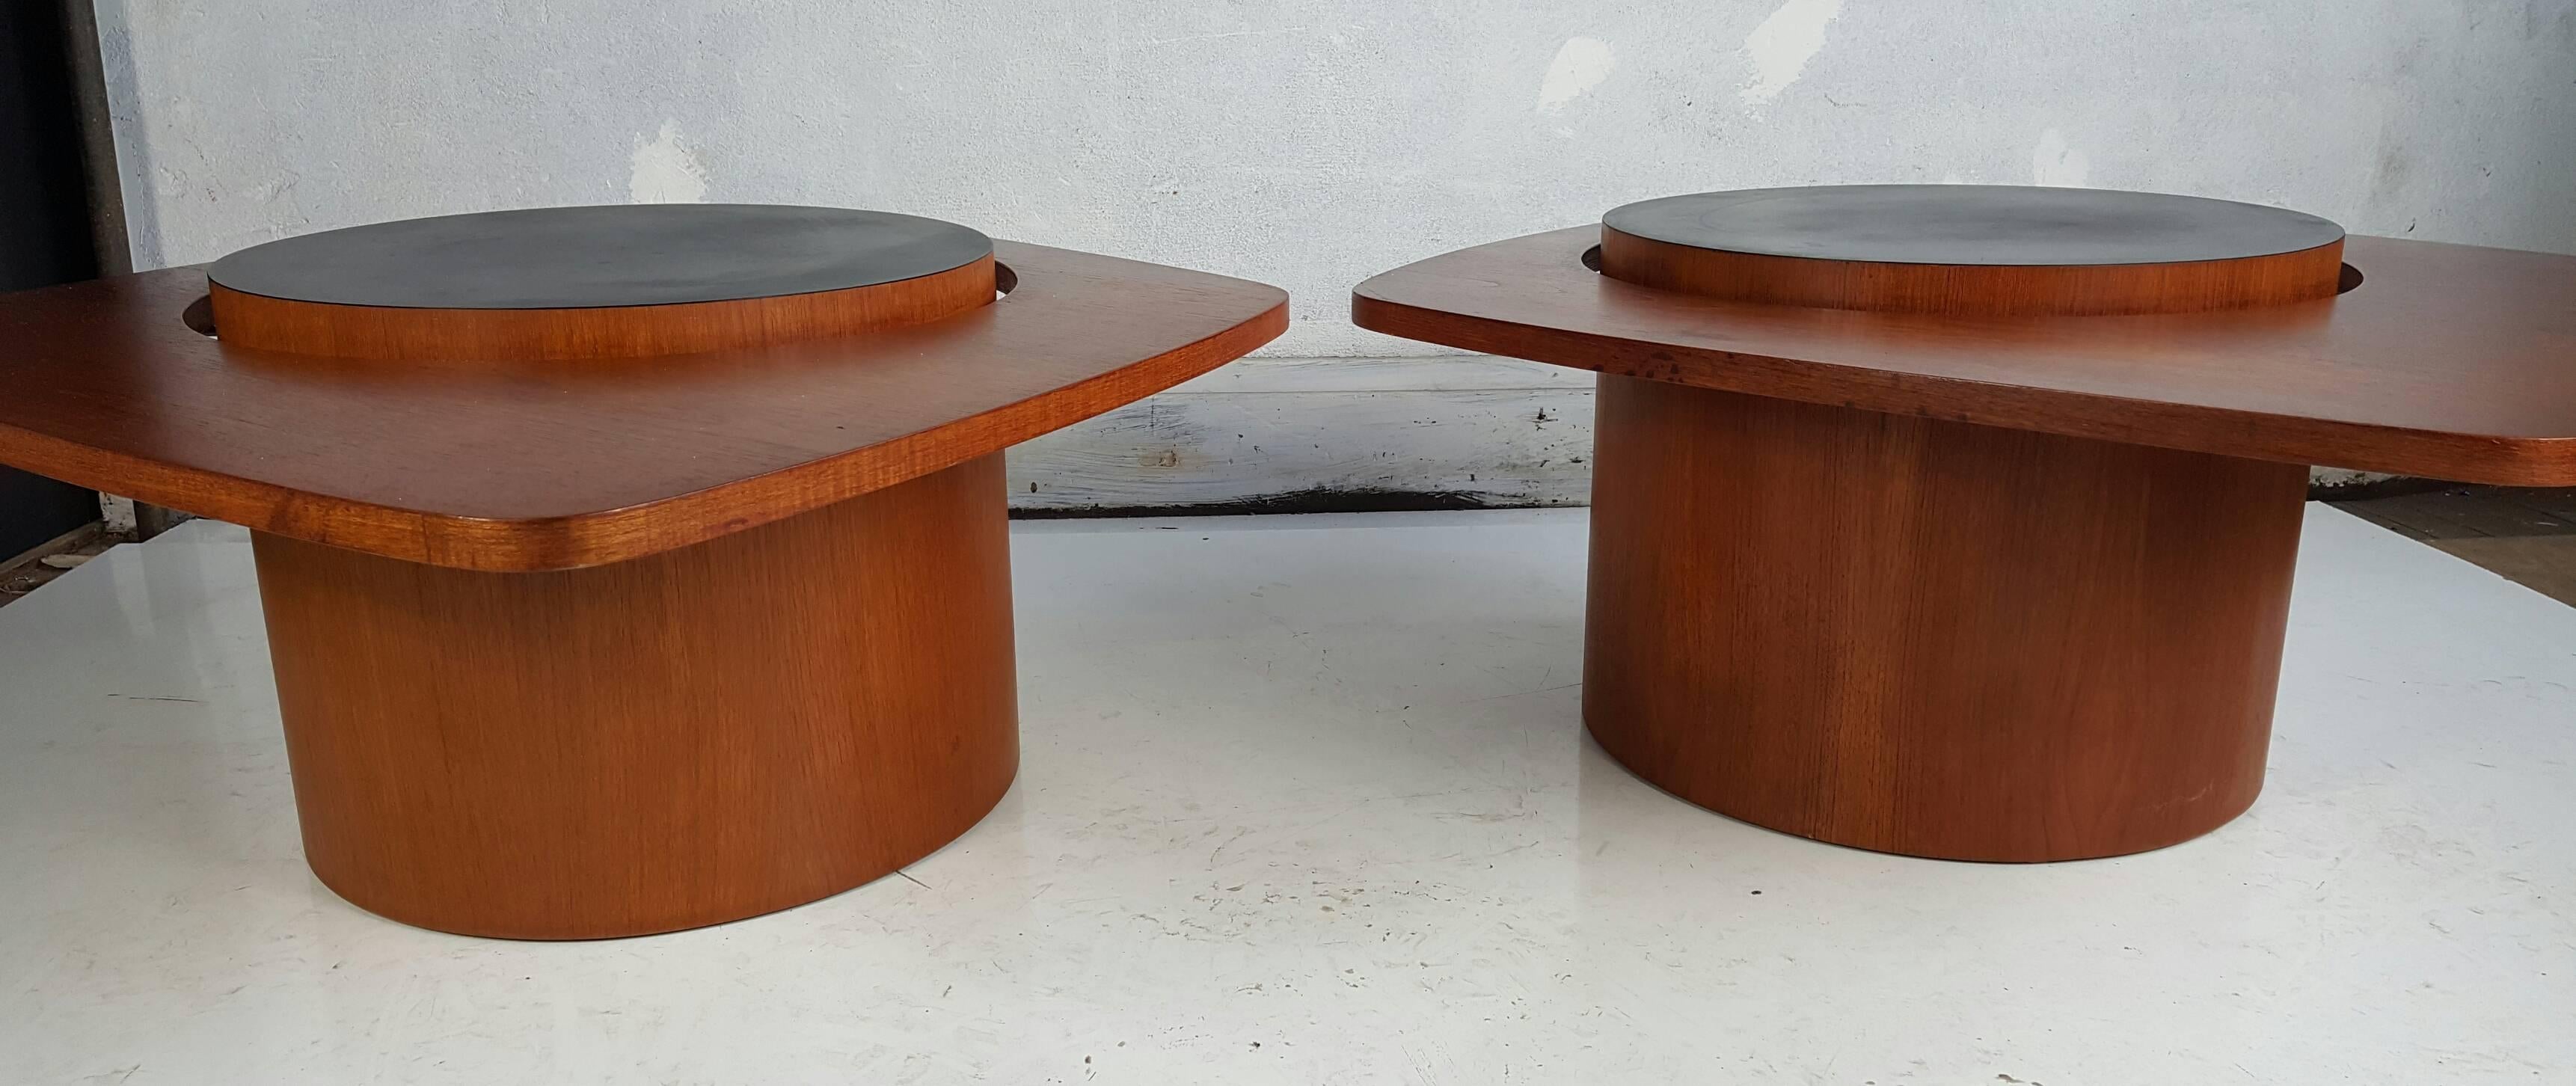 Rare Oversized Teak Expo 67 Pair of Cocktail Tables by RS Associates 3